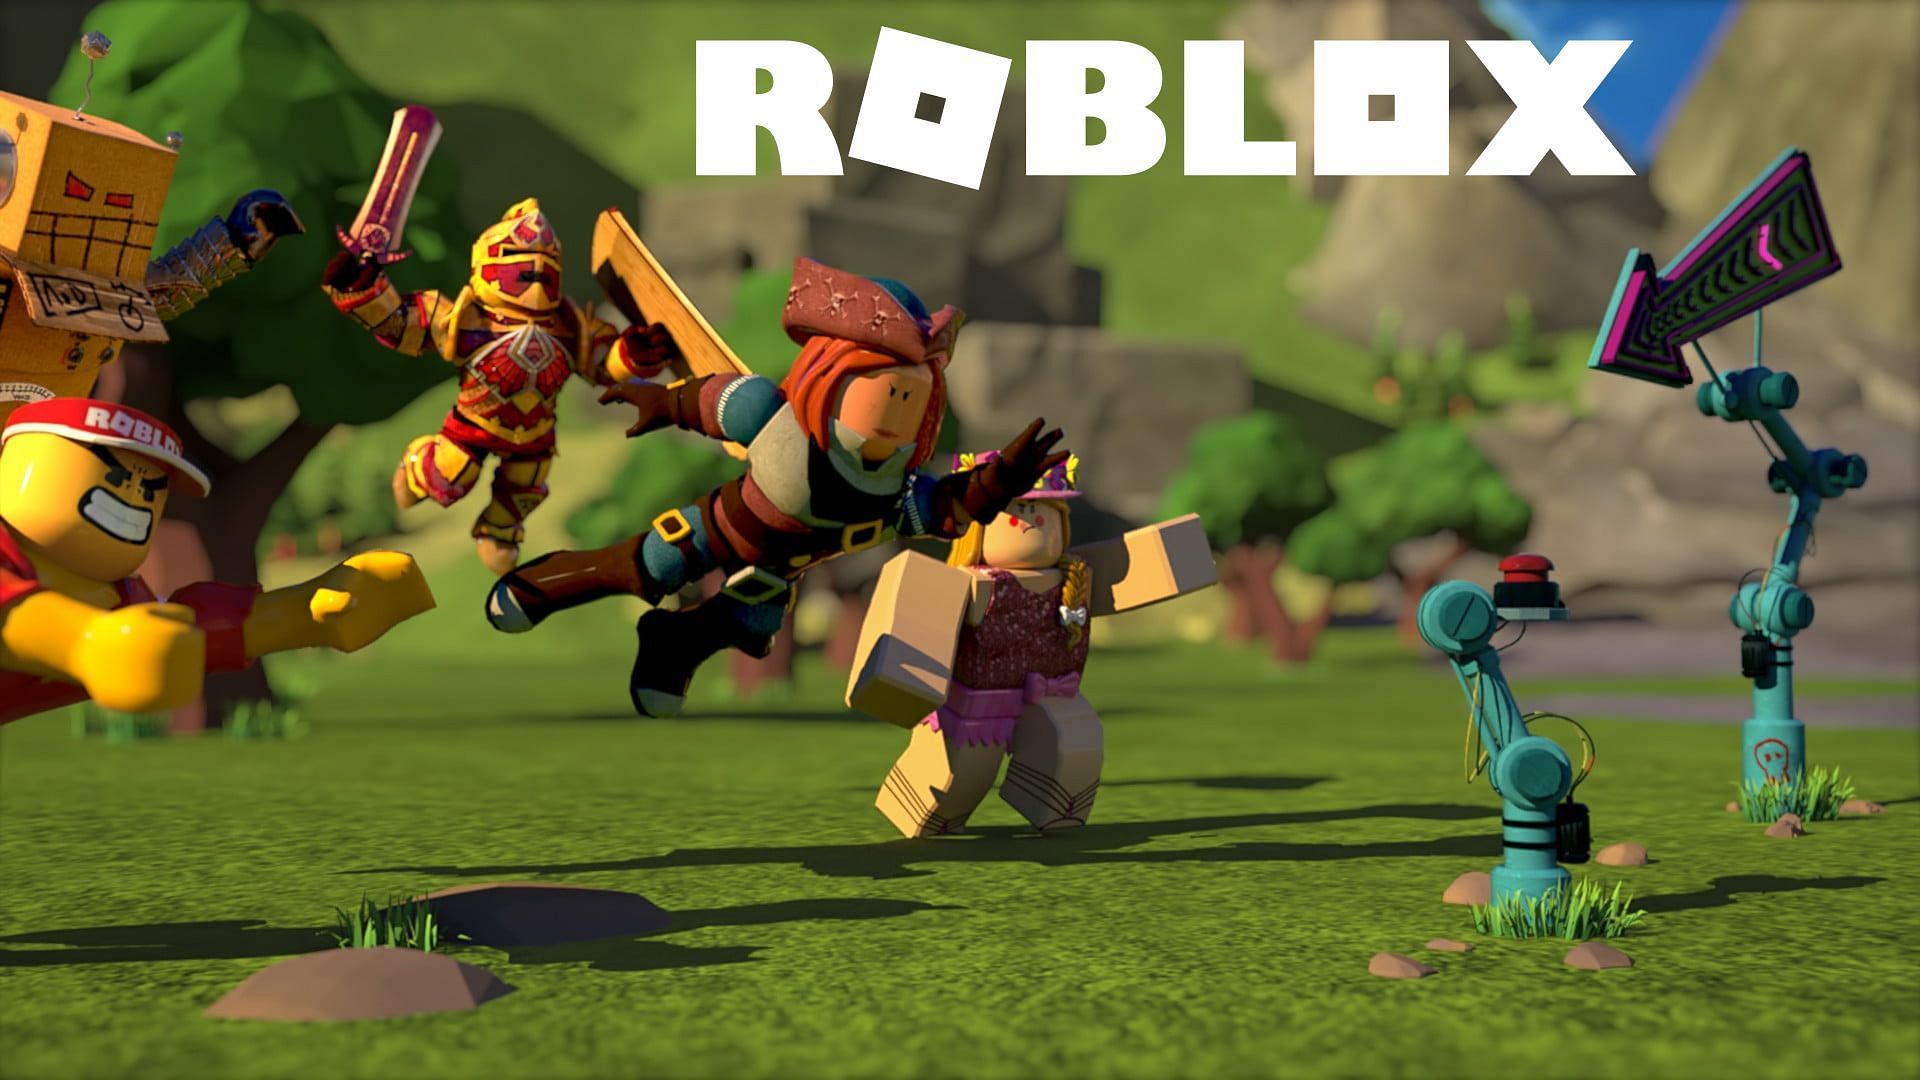 Which Adopt Me Pet Are You? Roblox Personality Test 